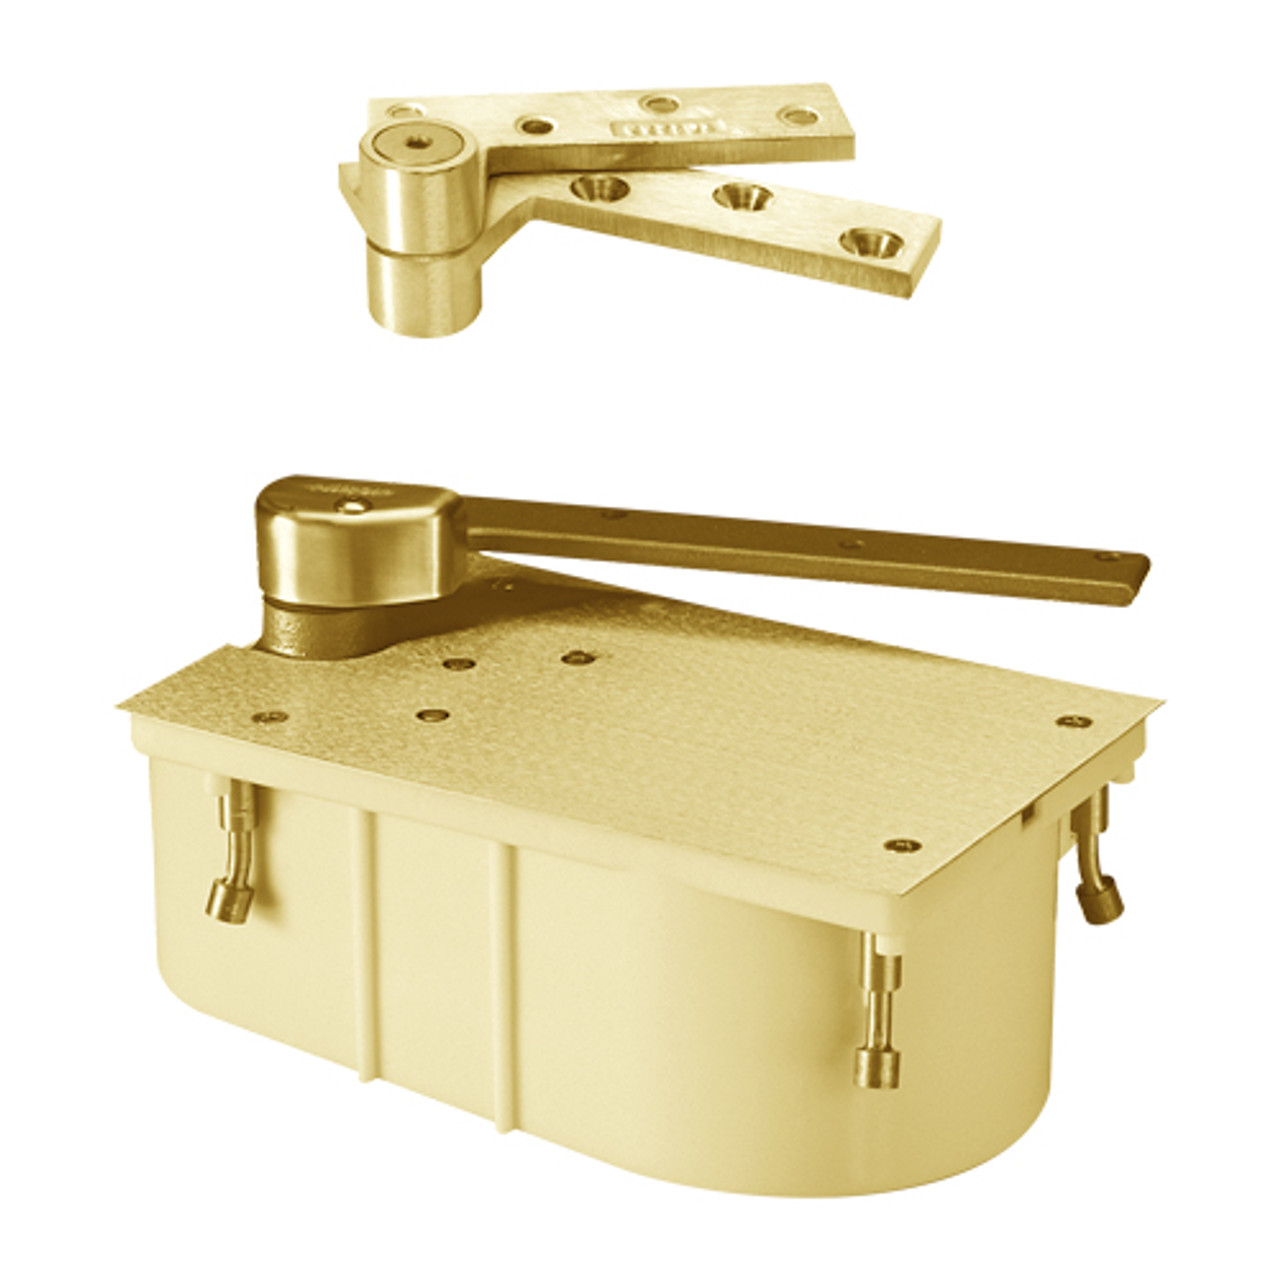 27-105N-LH-605 Rixson 27 Series Heavy Duty 3/4" Offset Hung Floor Closer in Bright Brass Finish